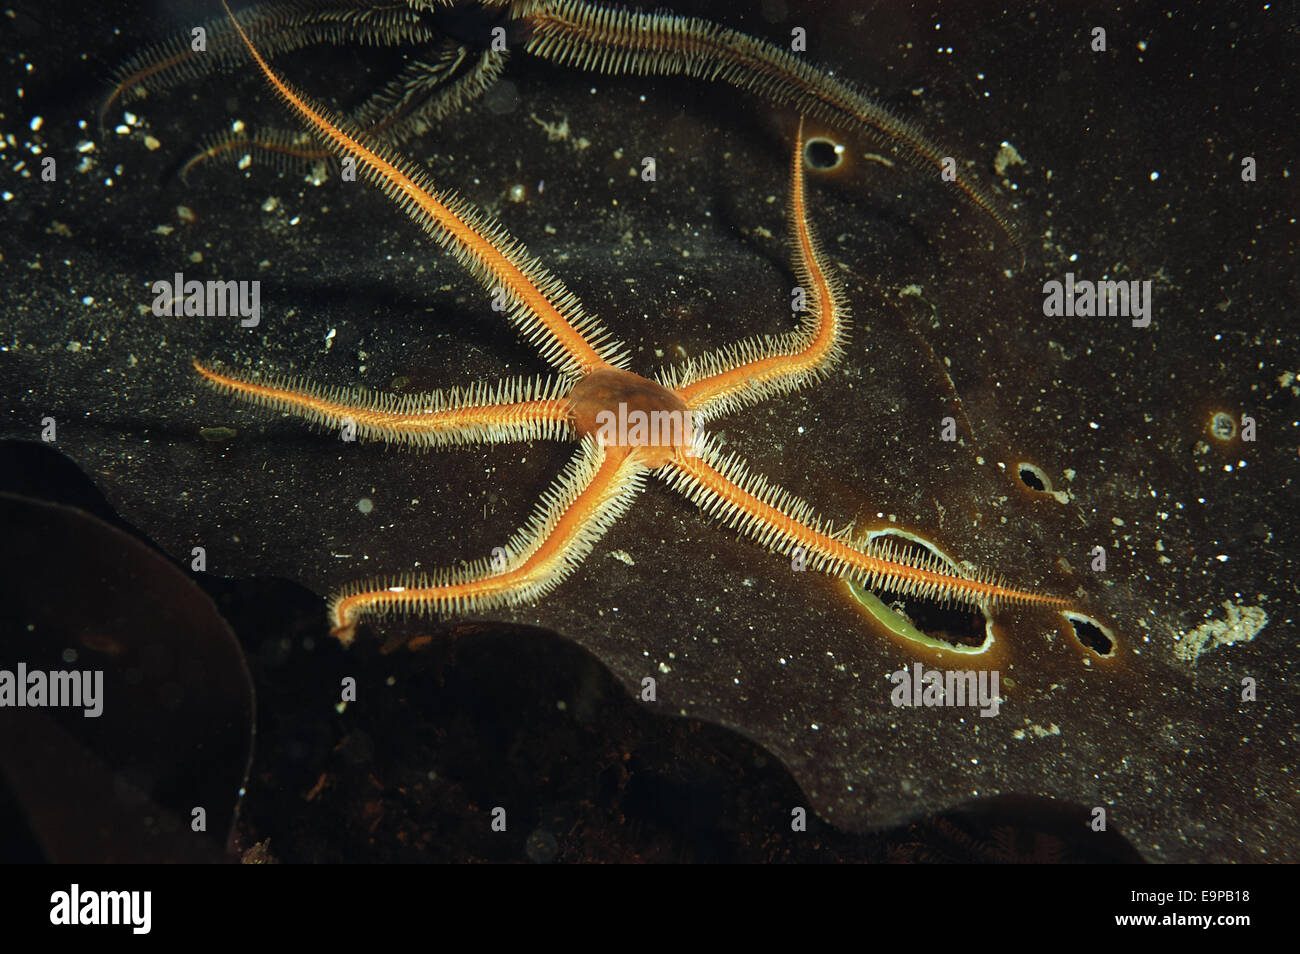 Black Brittlestar (Ophiocomina nigra) adult, on maerl bed in sea loch, Loch Carron, Ross and Cromarty, Highlands, Scotland, June Stock Photo